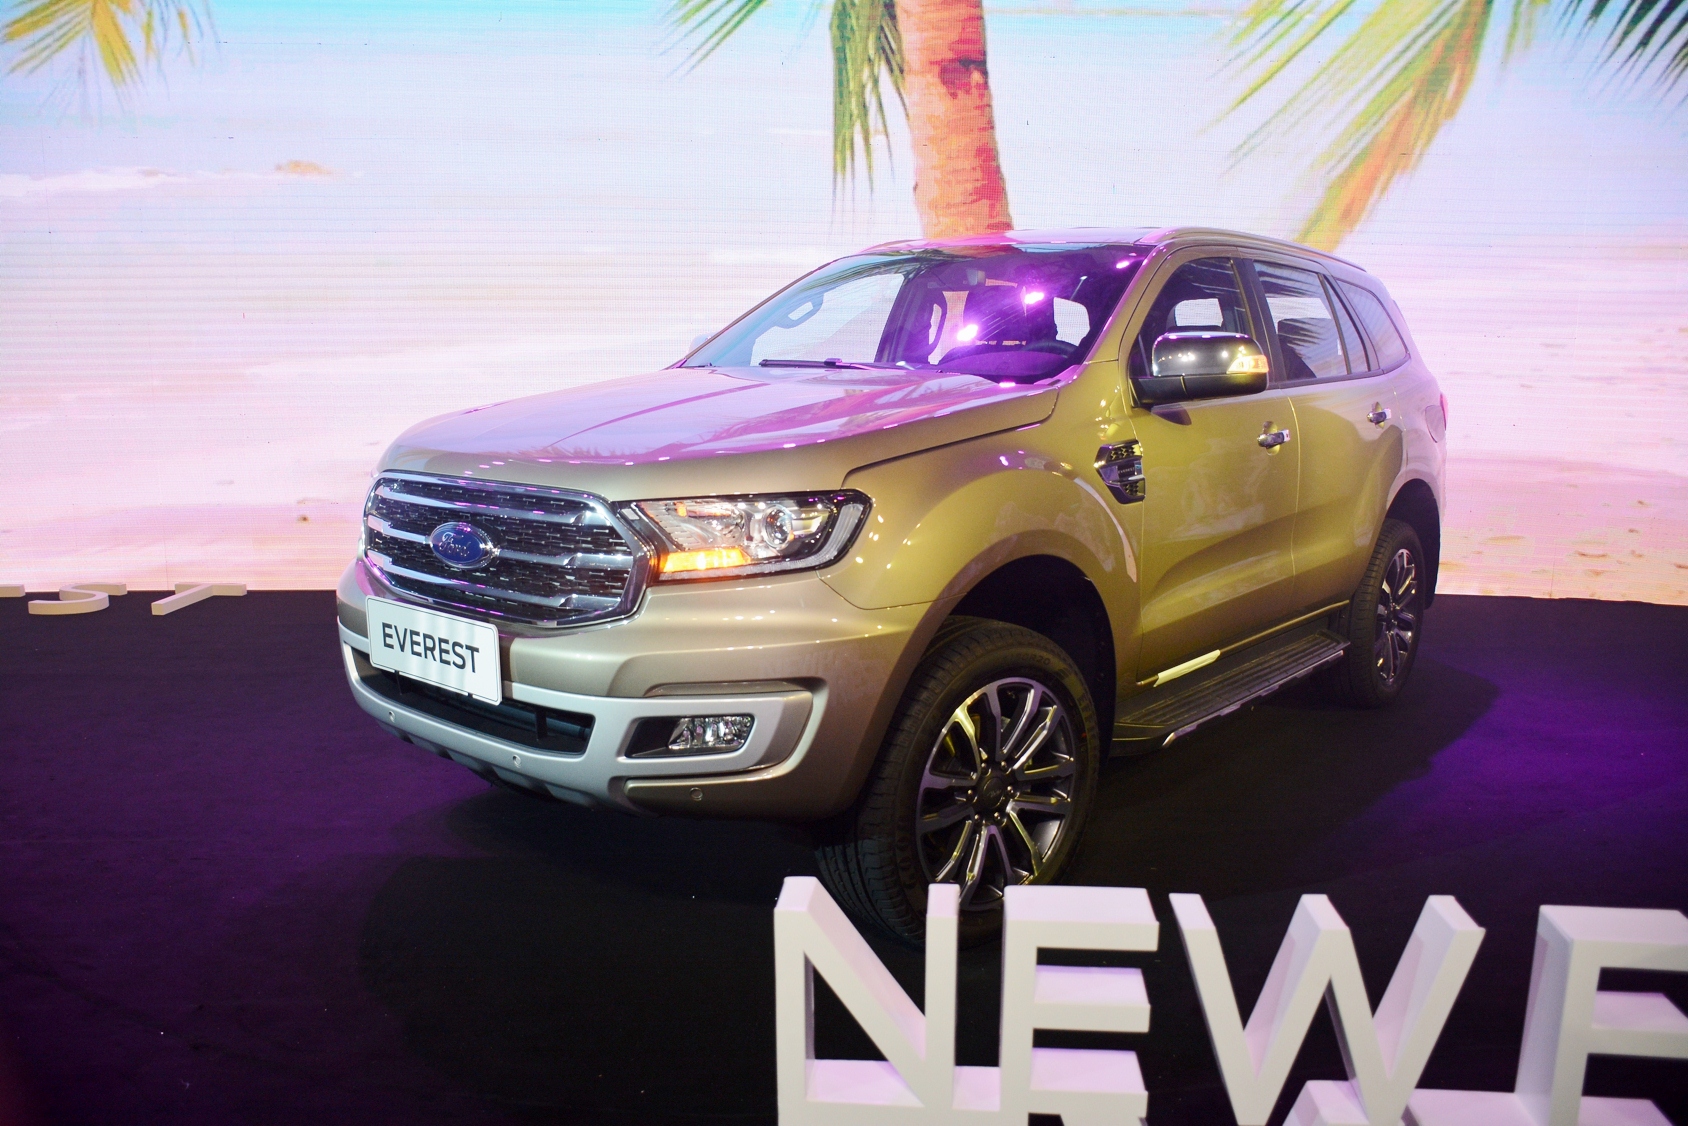 Ford-Everest-2018-dong-co-2-0L-Turbo-gia-1-399-ty-dong-anh-1